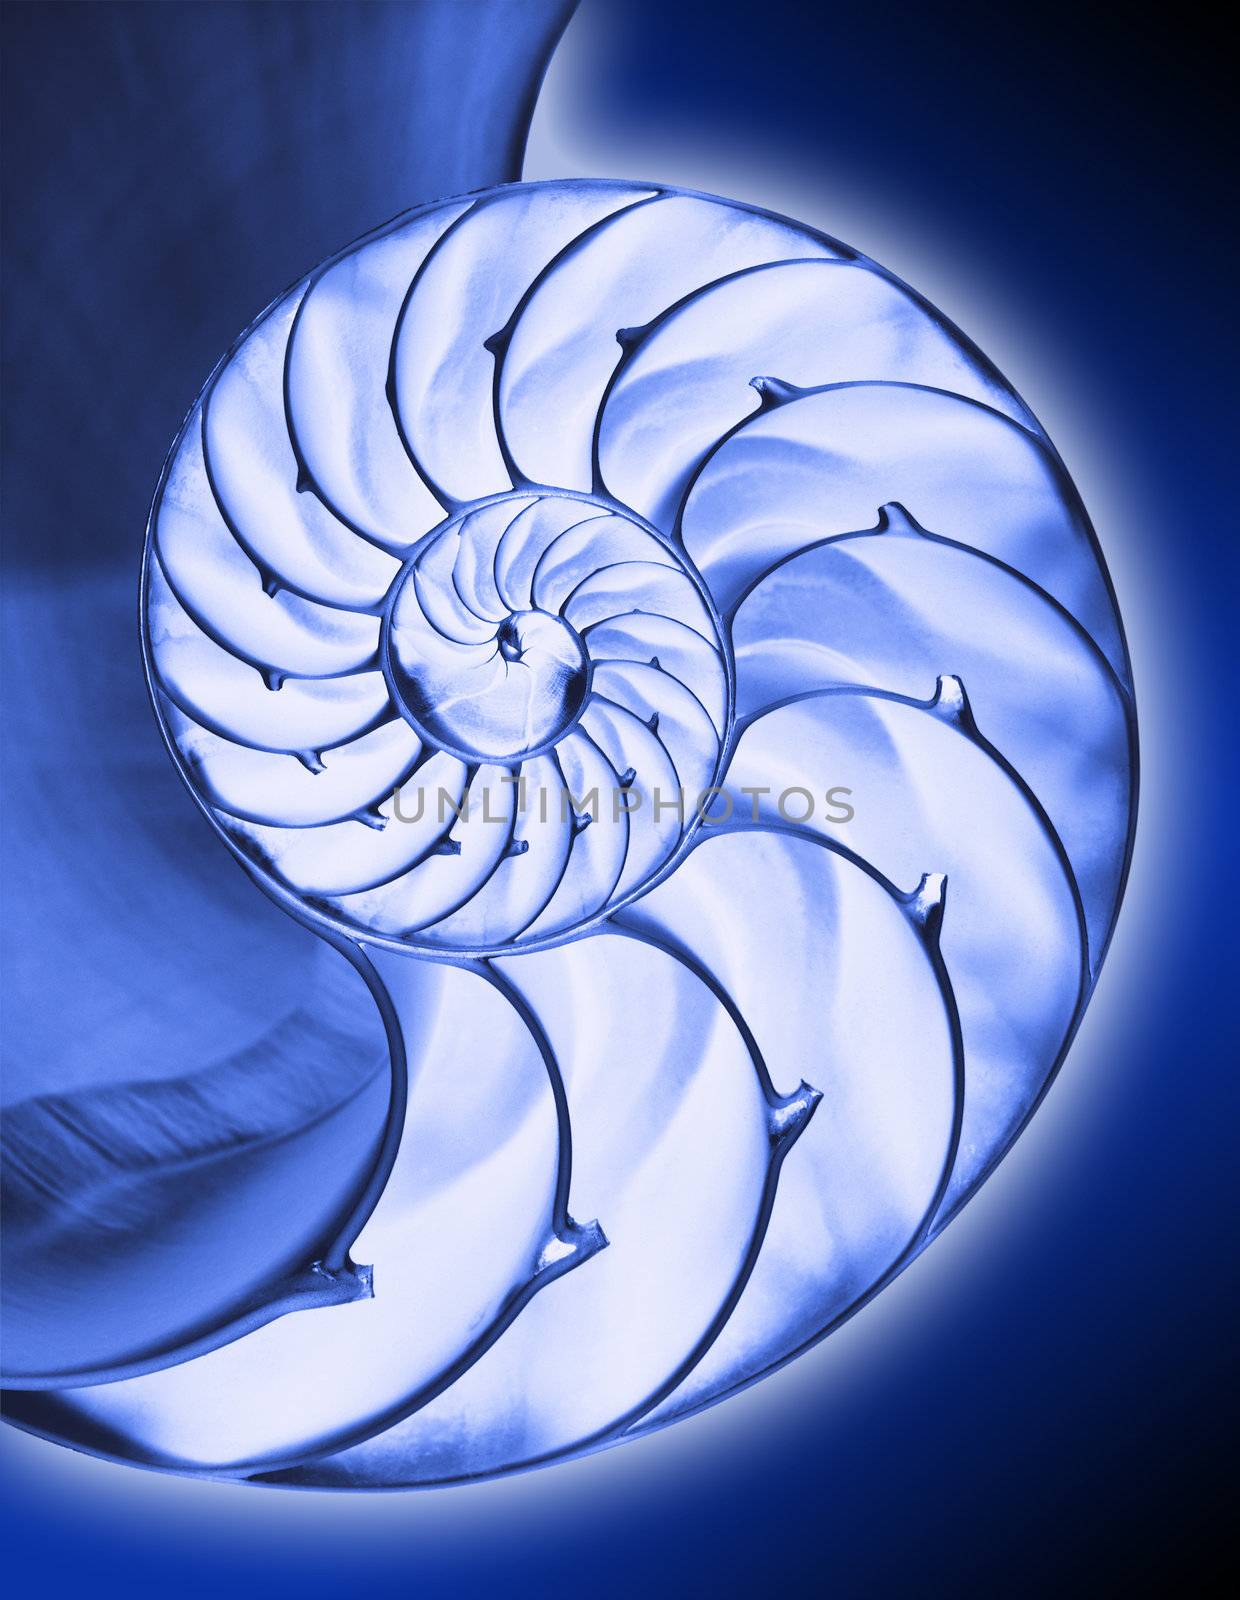 nautilus shell in negative form cut in half with blue tones